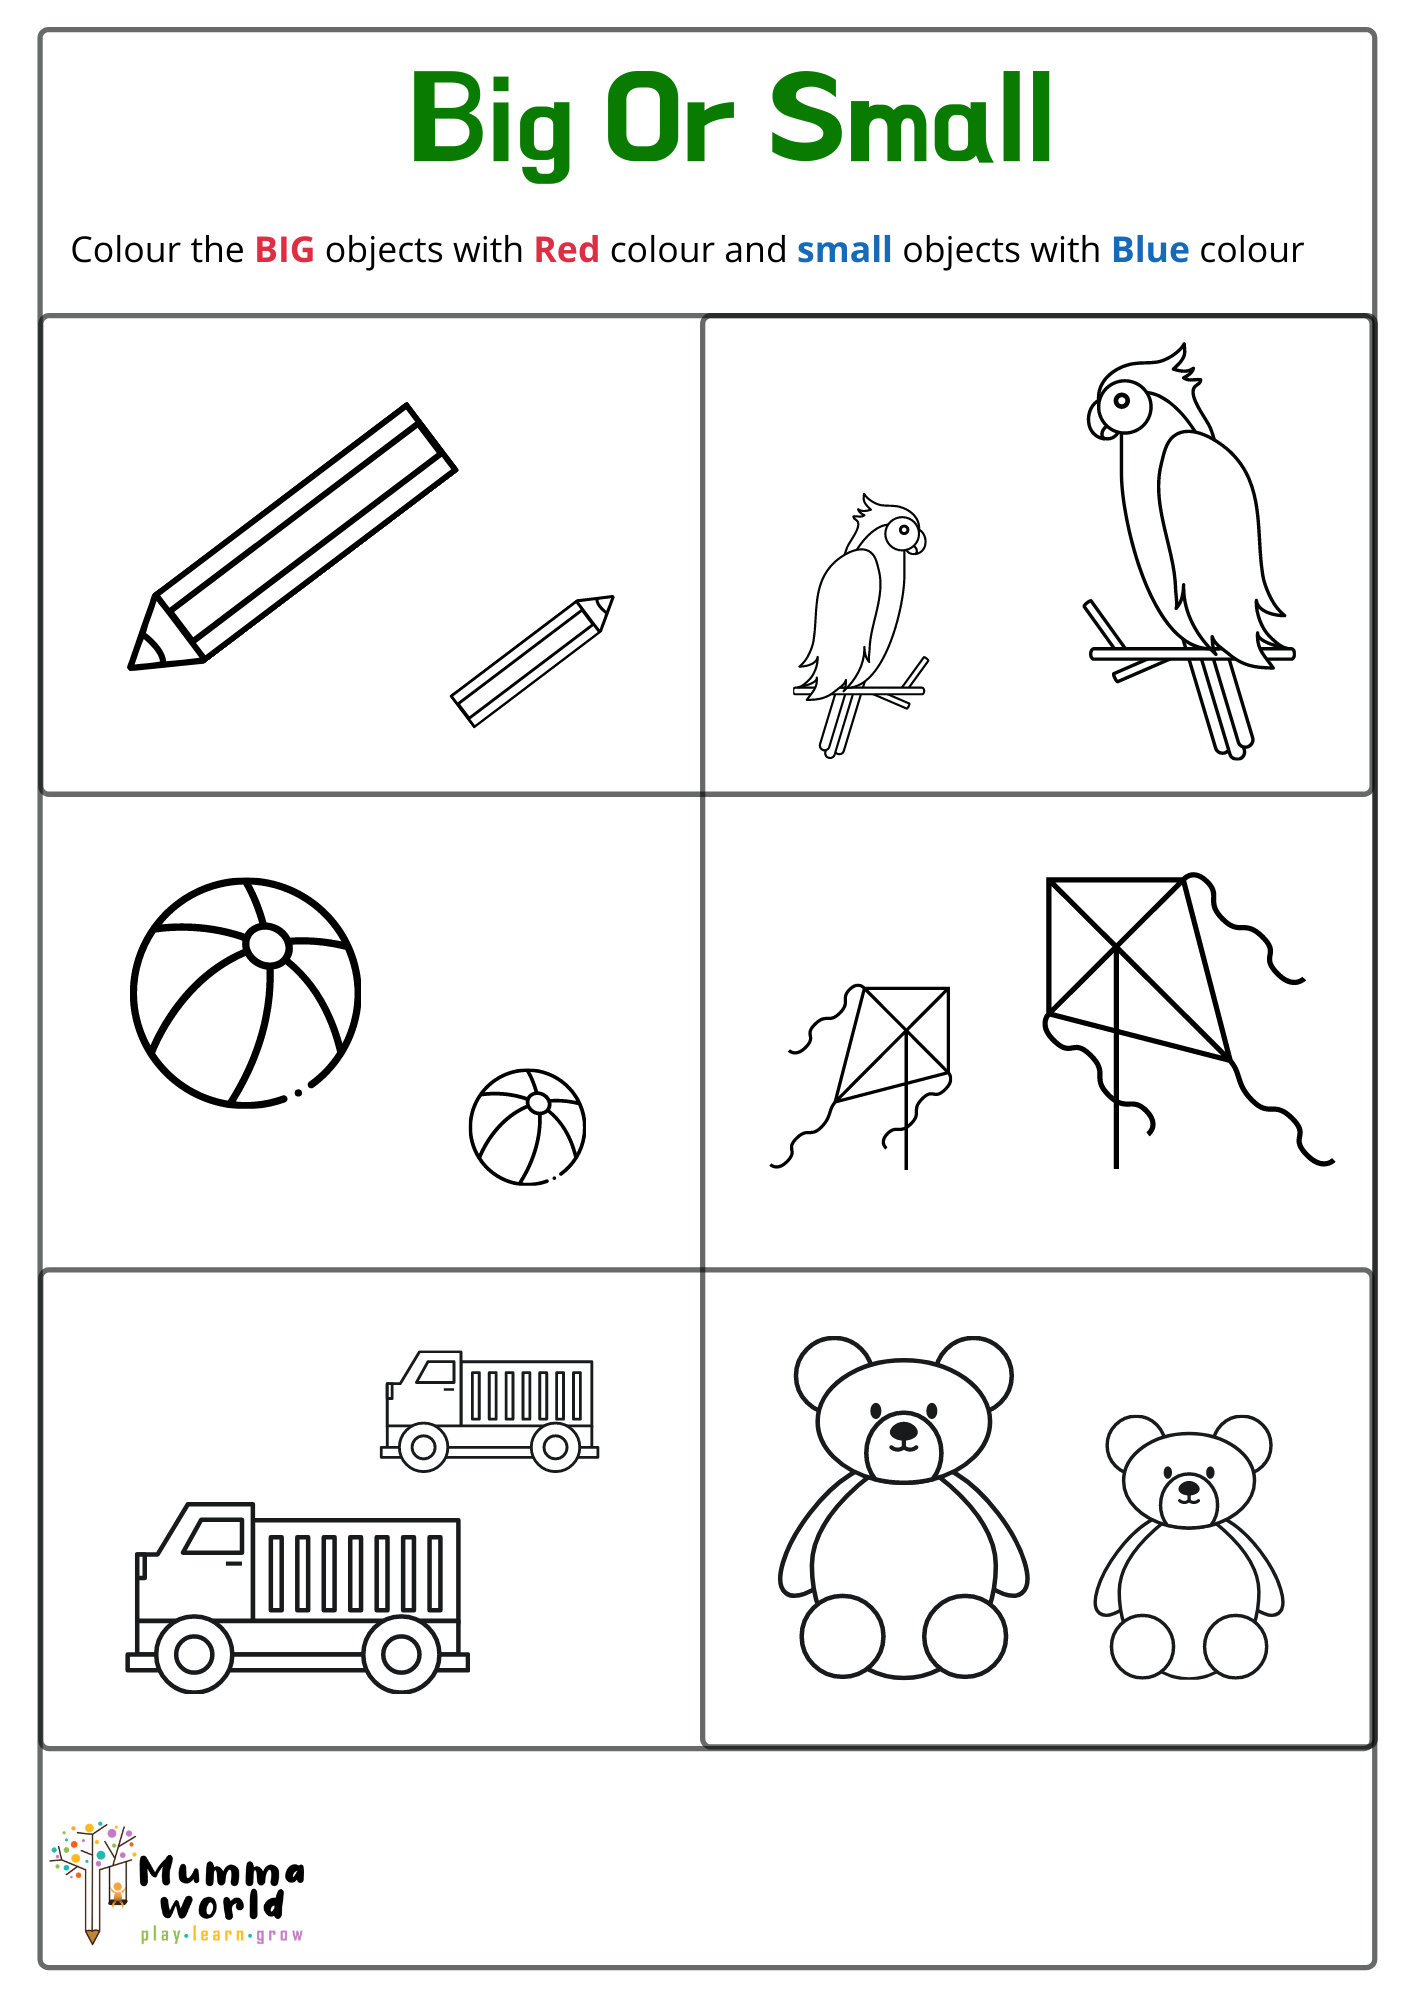 worksheets-archives-page-22-of-24-mumma-world